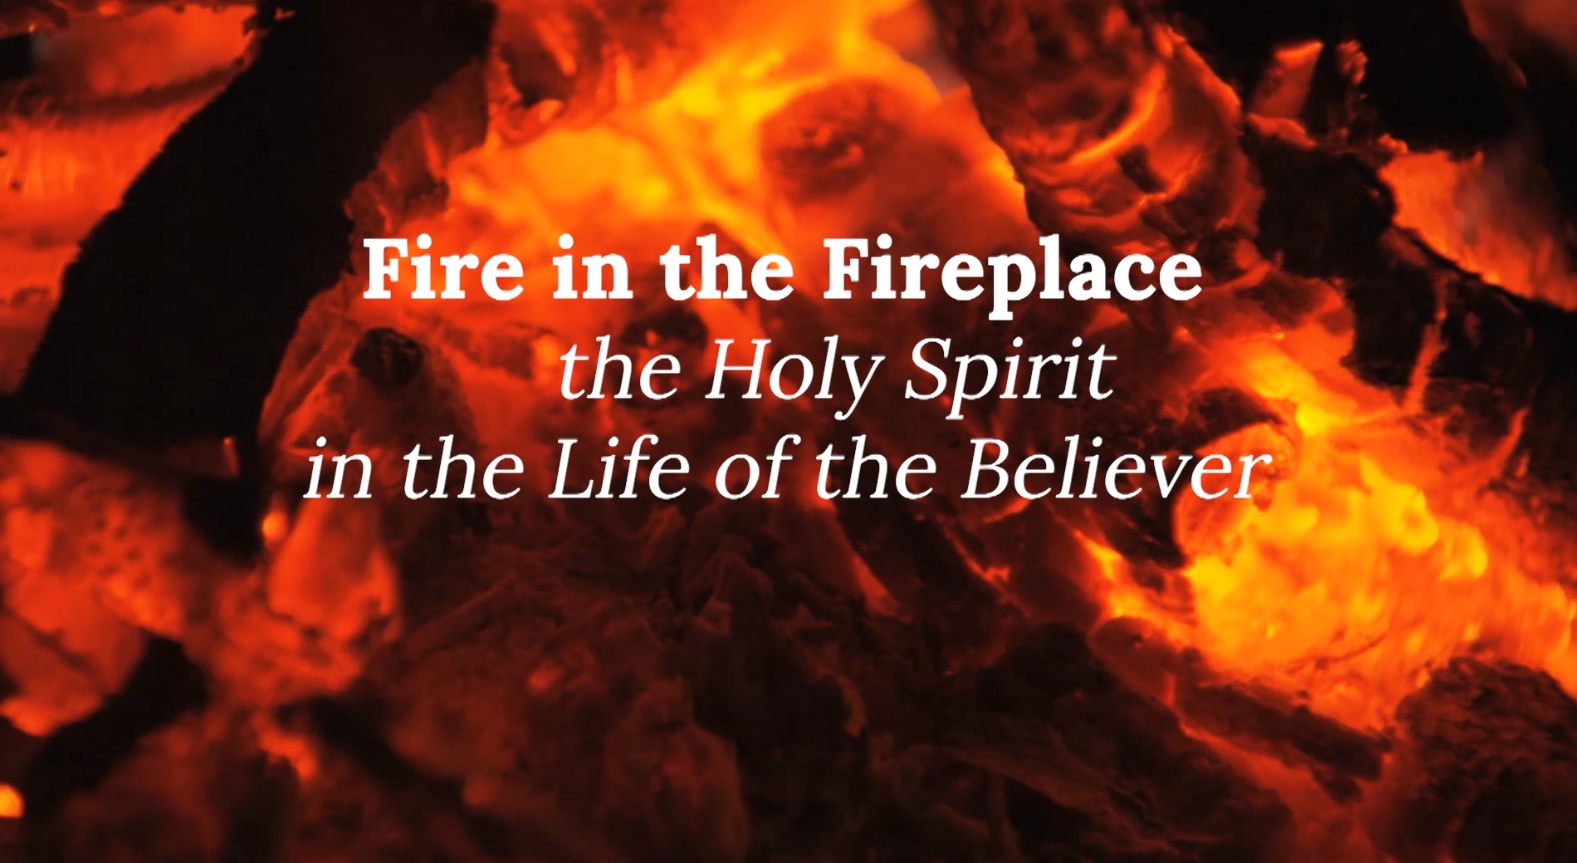 Fire in the Fireplace: the Holy Spirit in the Life of the Believer